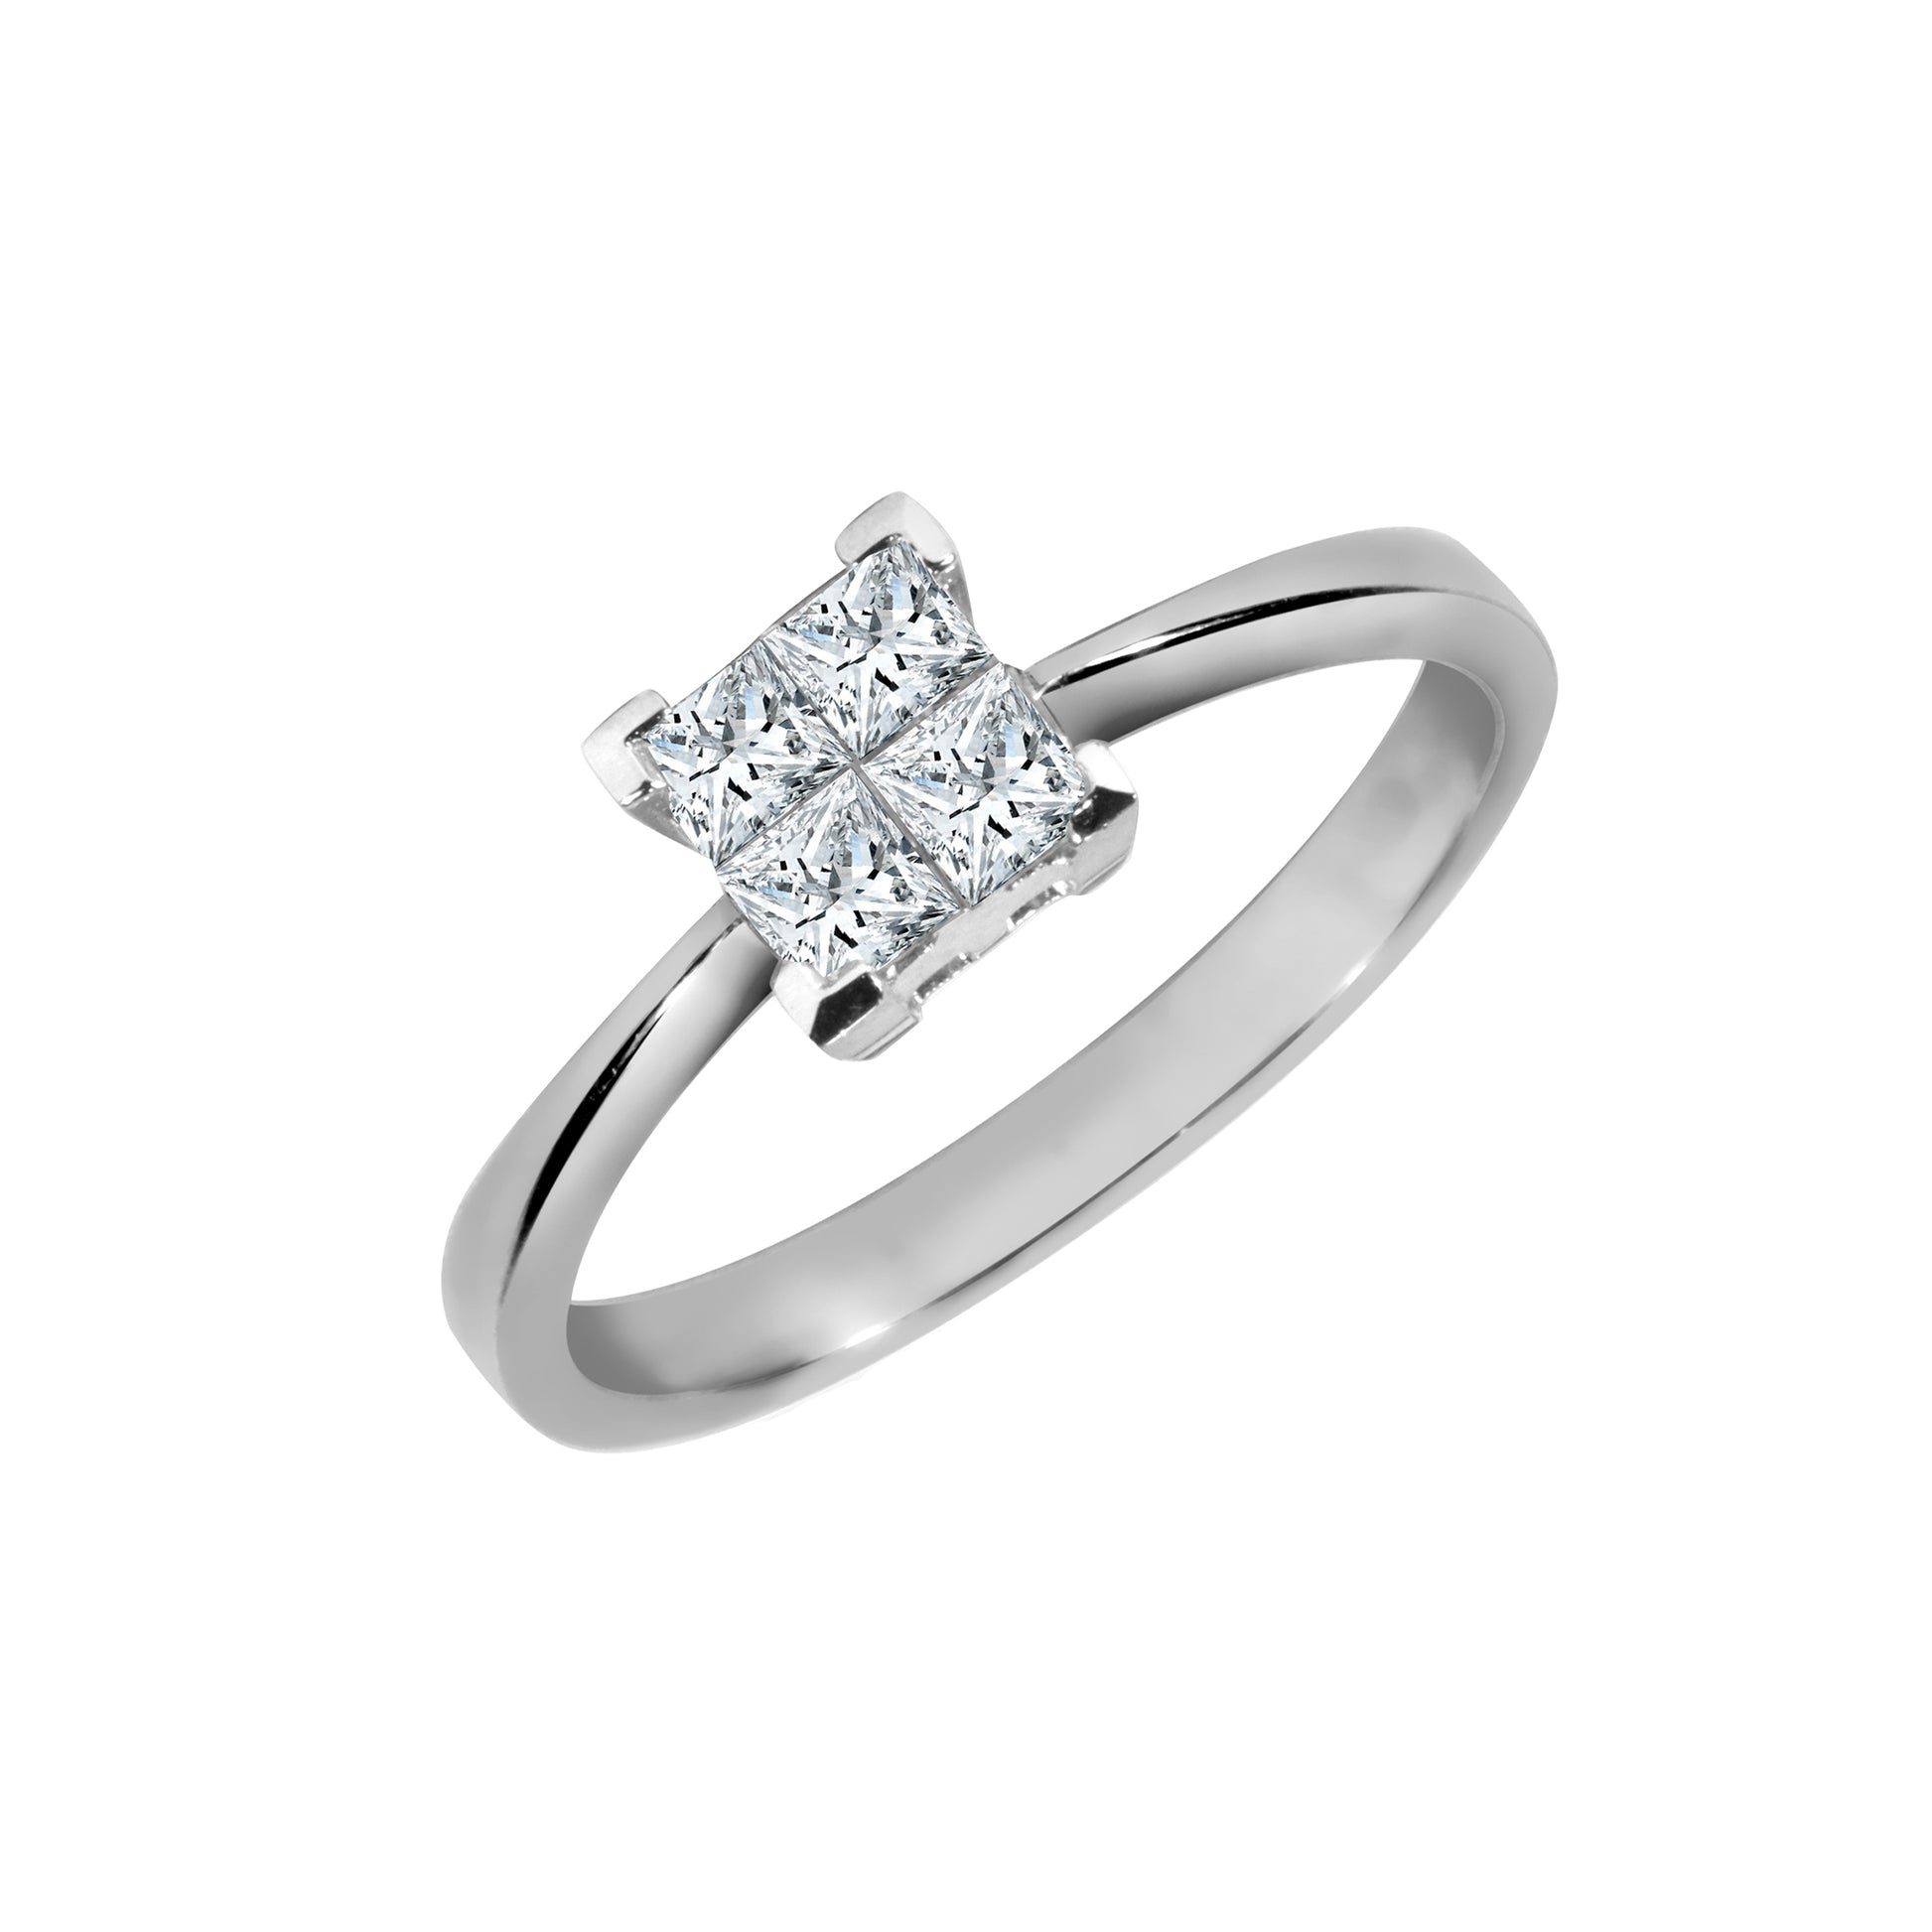 18ct White Gold  Diamond Illusion Solitaire Engagement Ring 7.5mm - 18R377-075